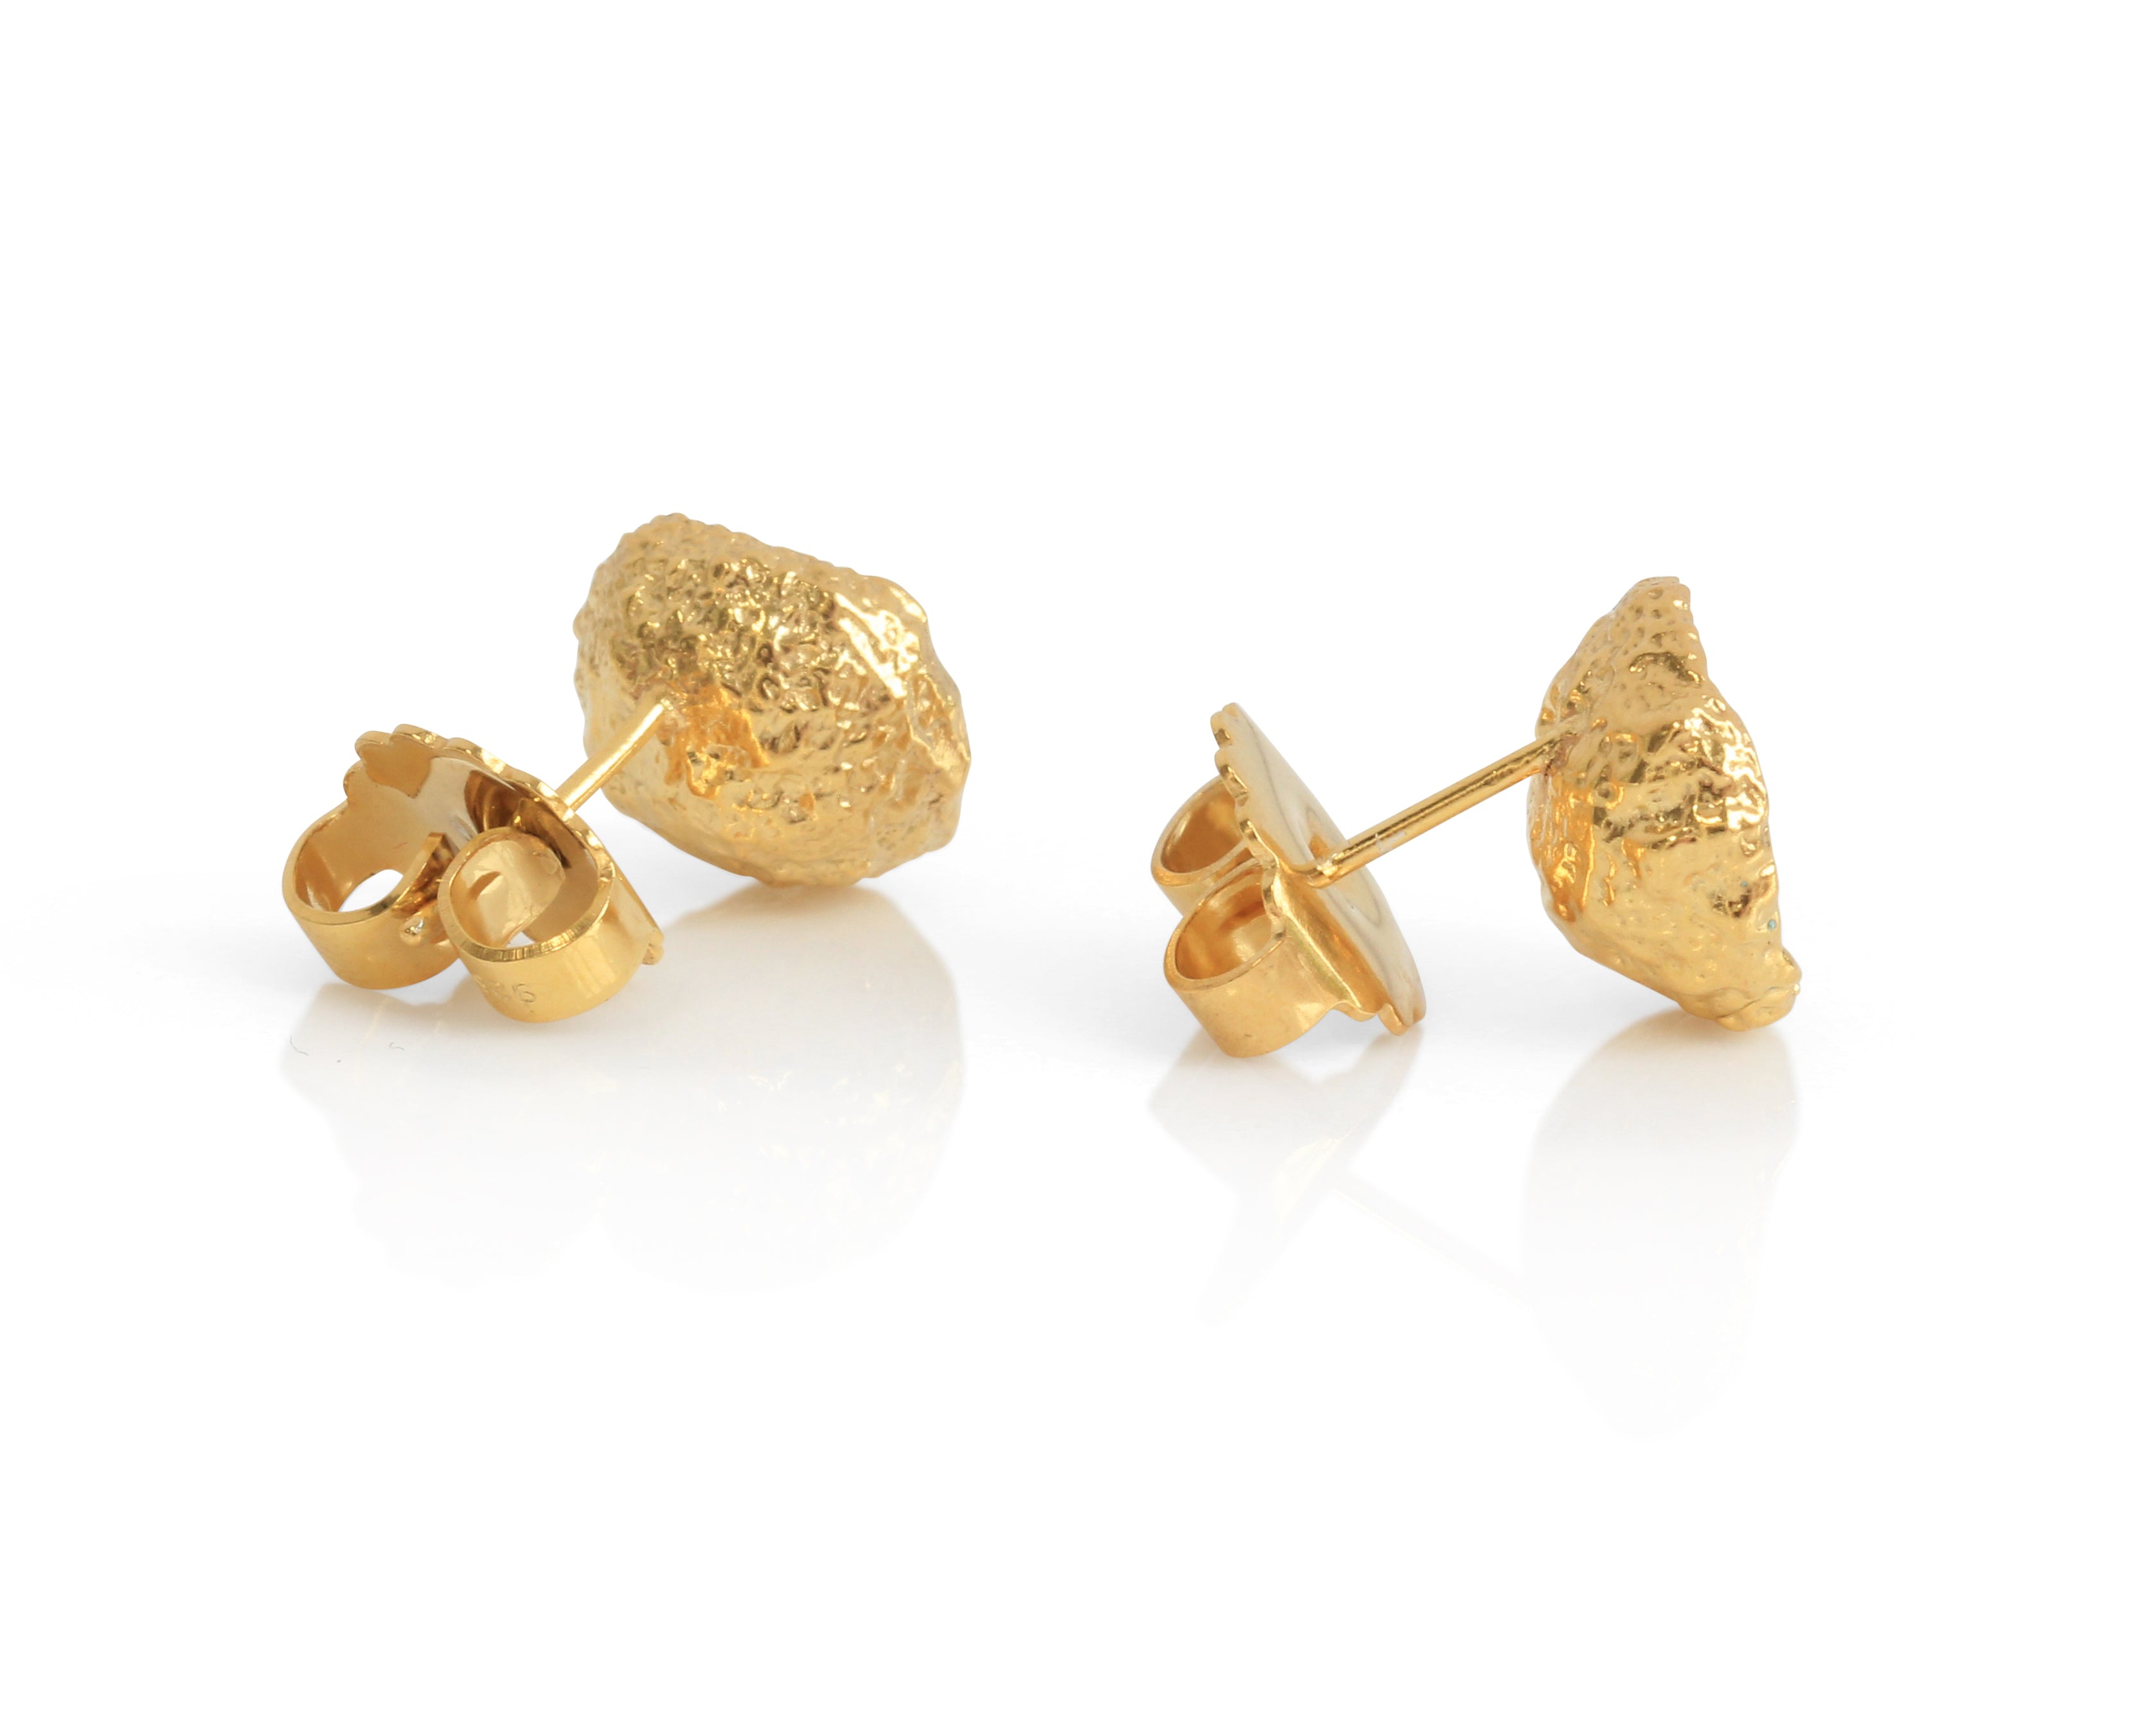 Showing the back of acorn enamel studs in cast silver, 18 carat yellow gold plating and large earring fasteners